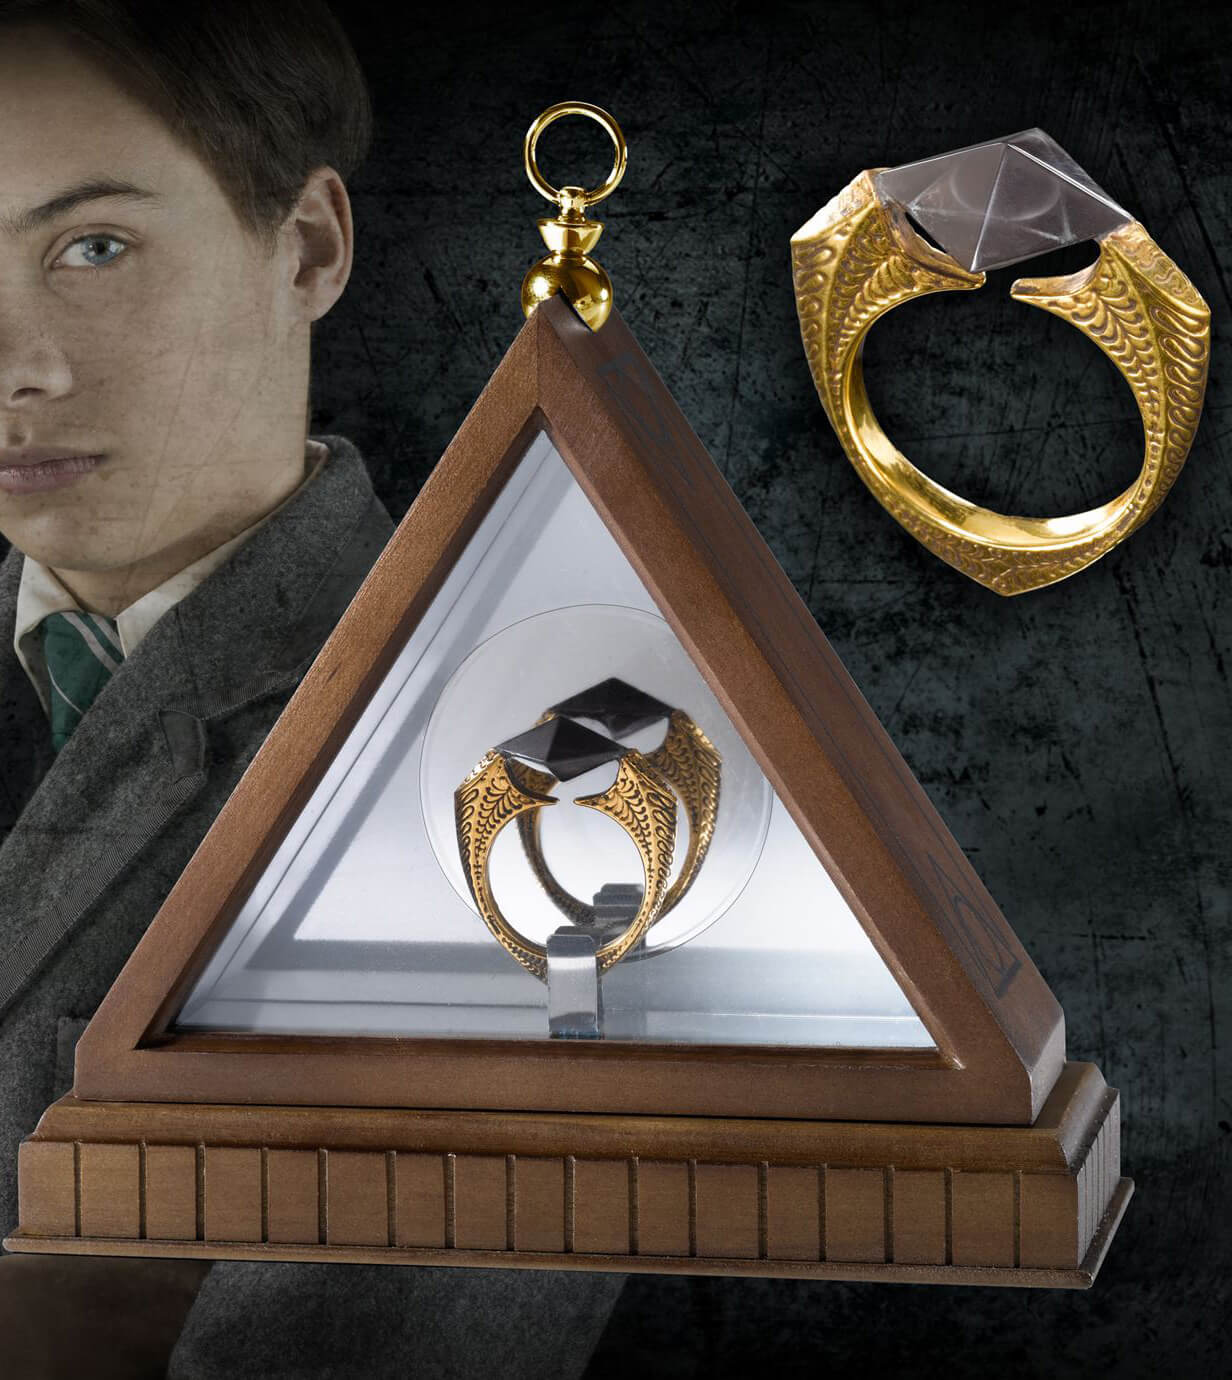 Harry Potter Lord Voldemort's Horcrux Ring Replica (goldplated